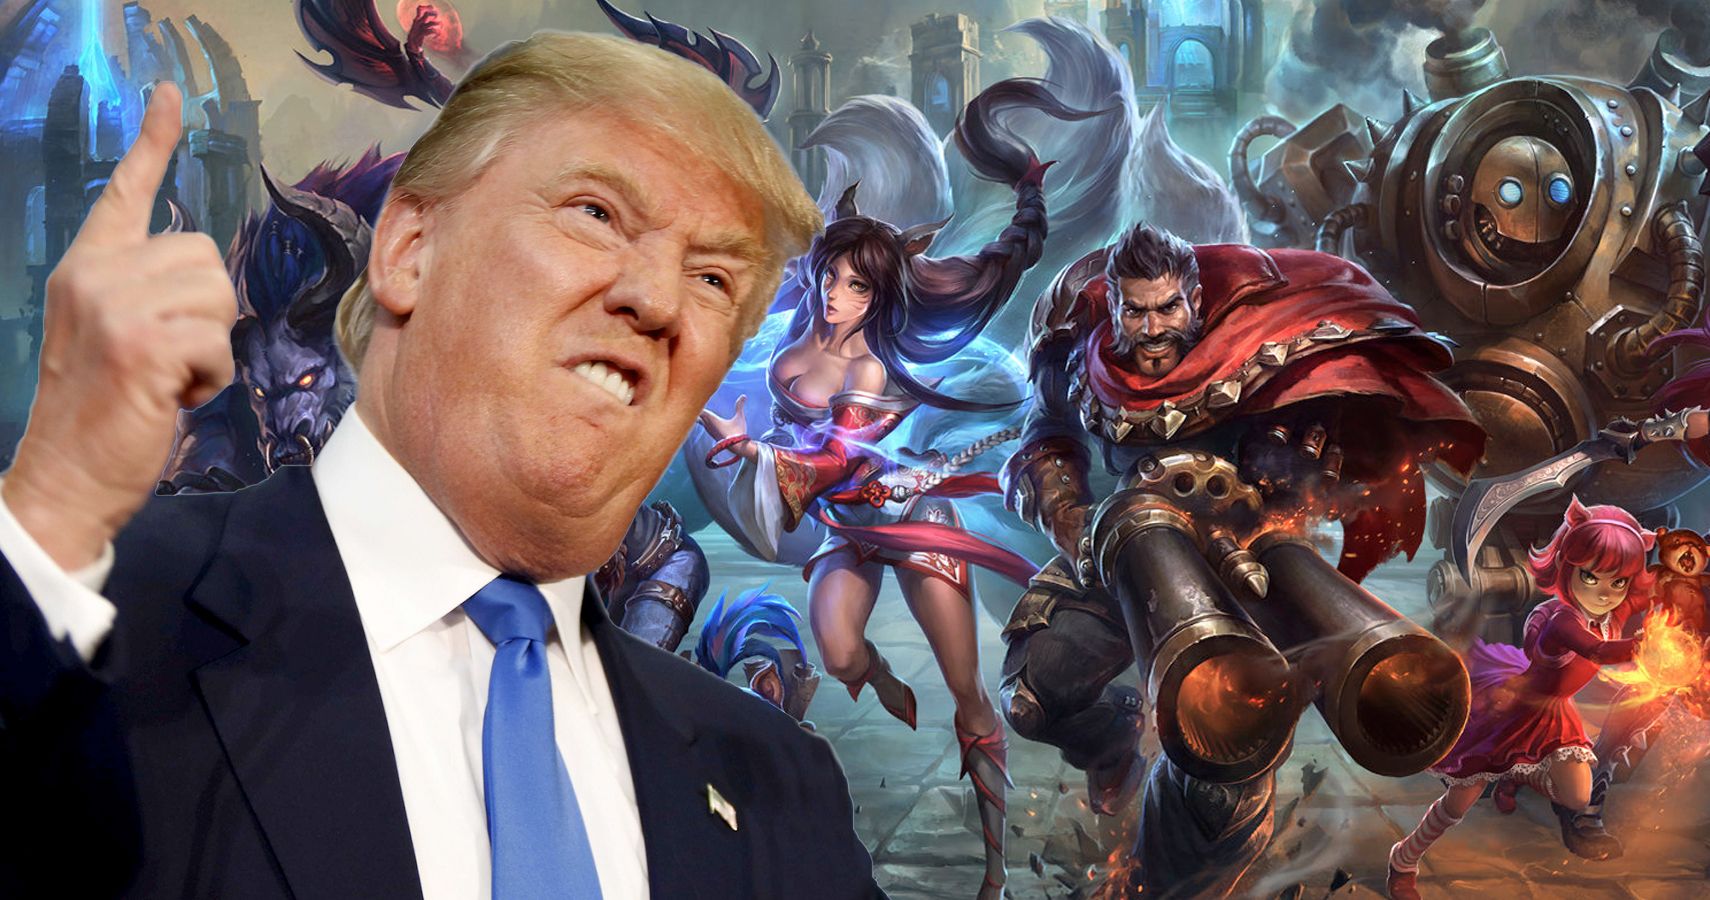 Donald Trump Just Used League Of Legends Music In An Ad